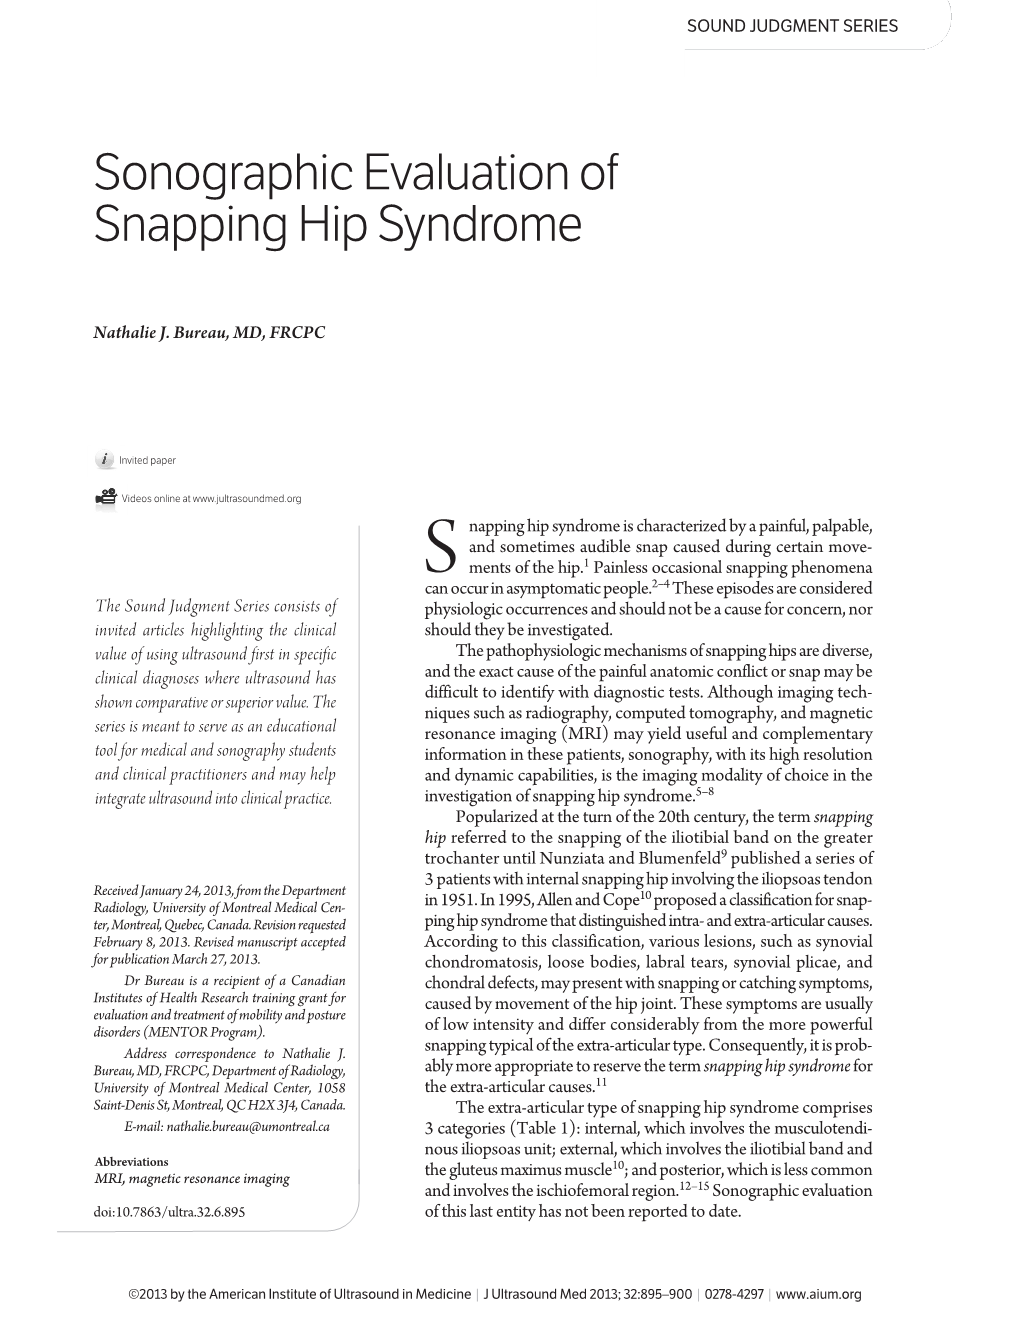 Sonographic Evaluation of Snapping Hip Syndrome